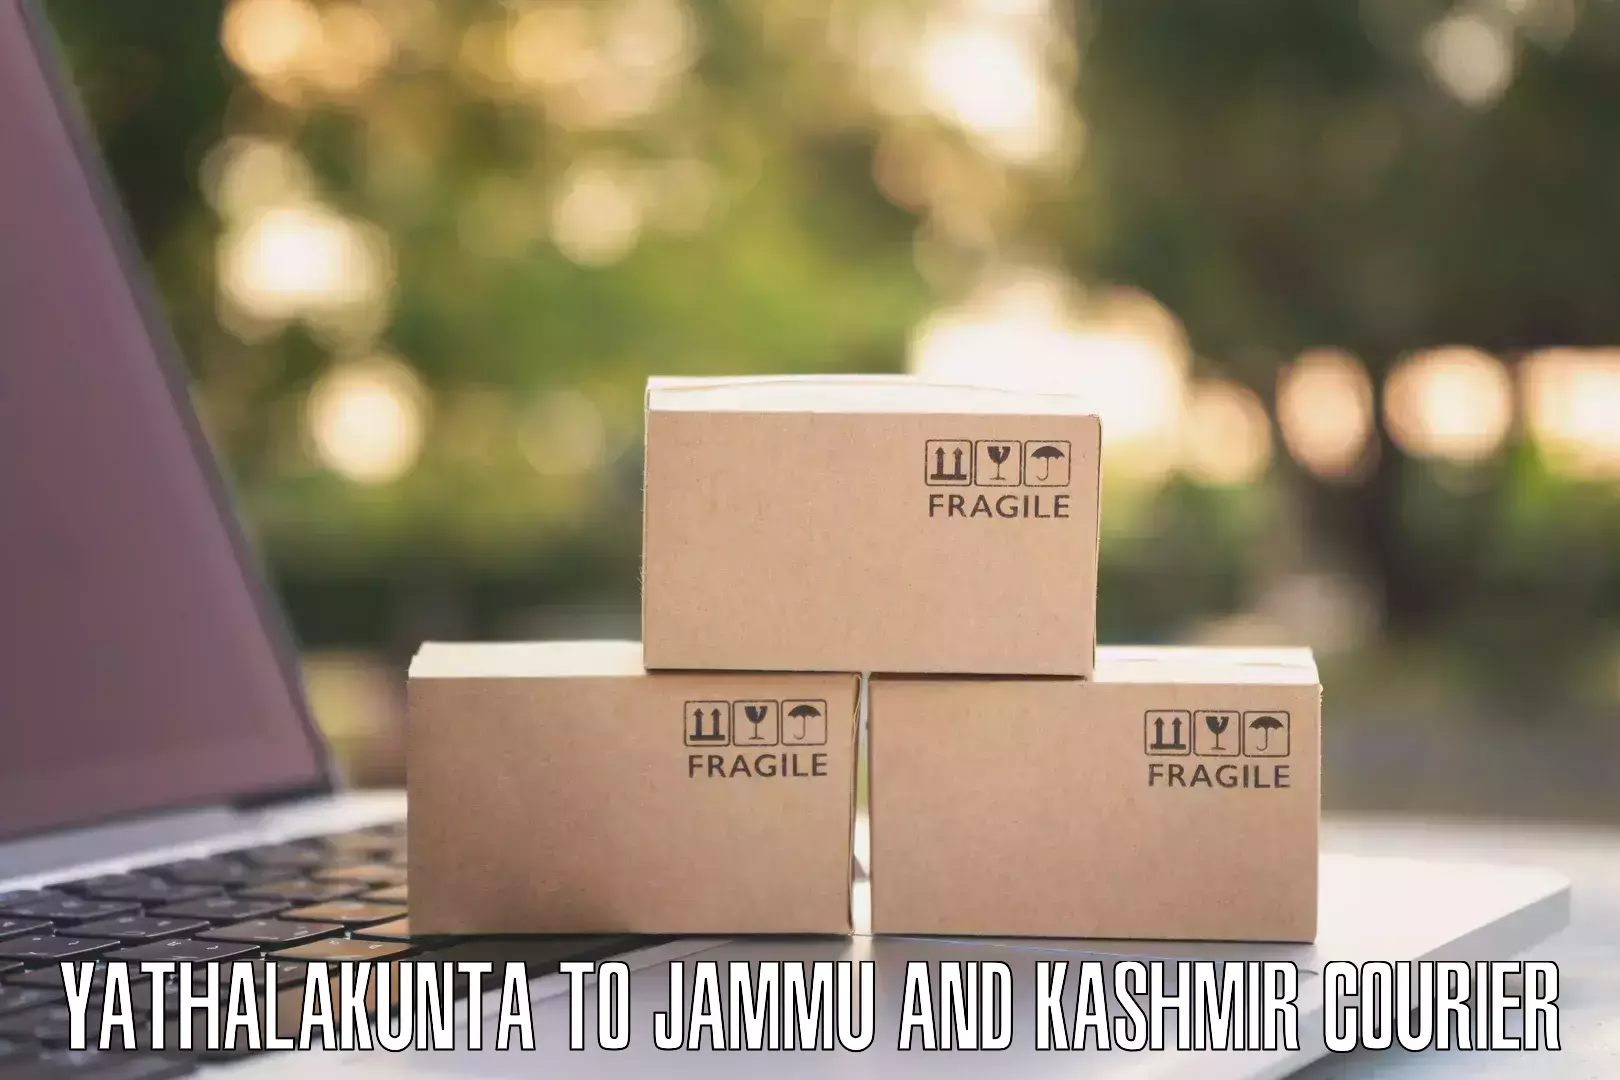 Cost-effective courier options Yathalakunta to Jammu and Kashmir